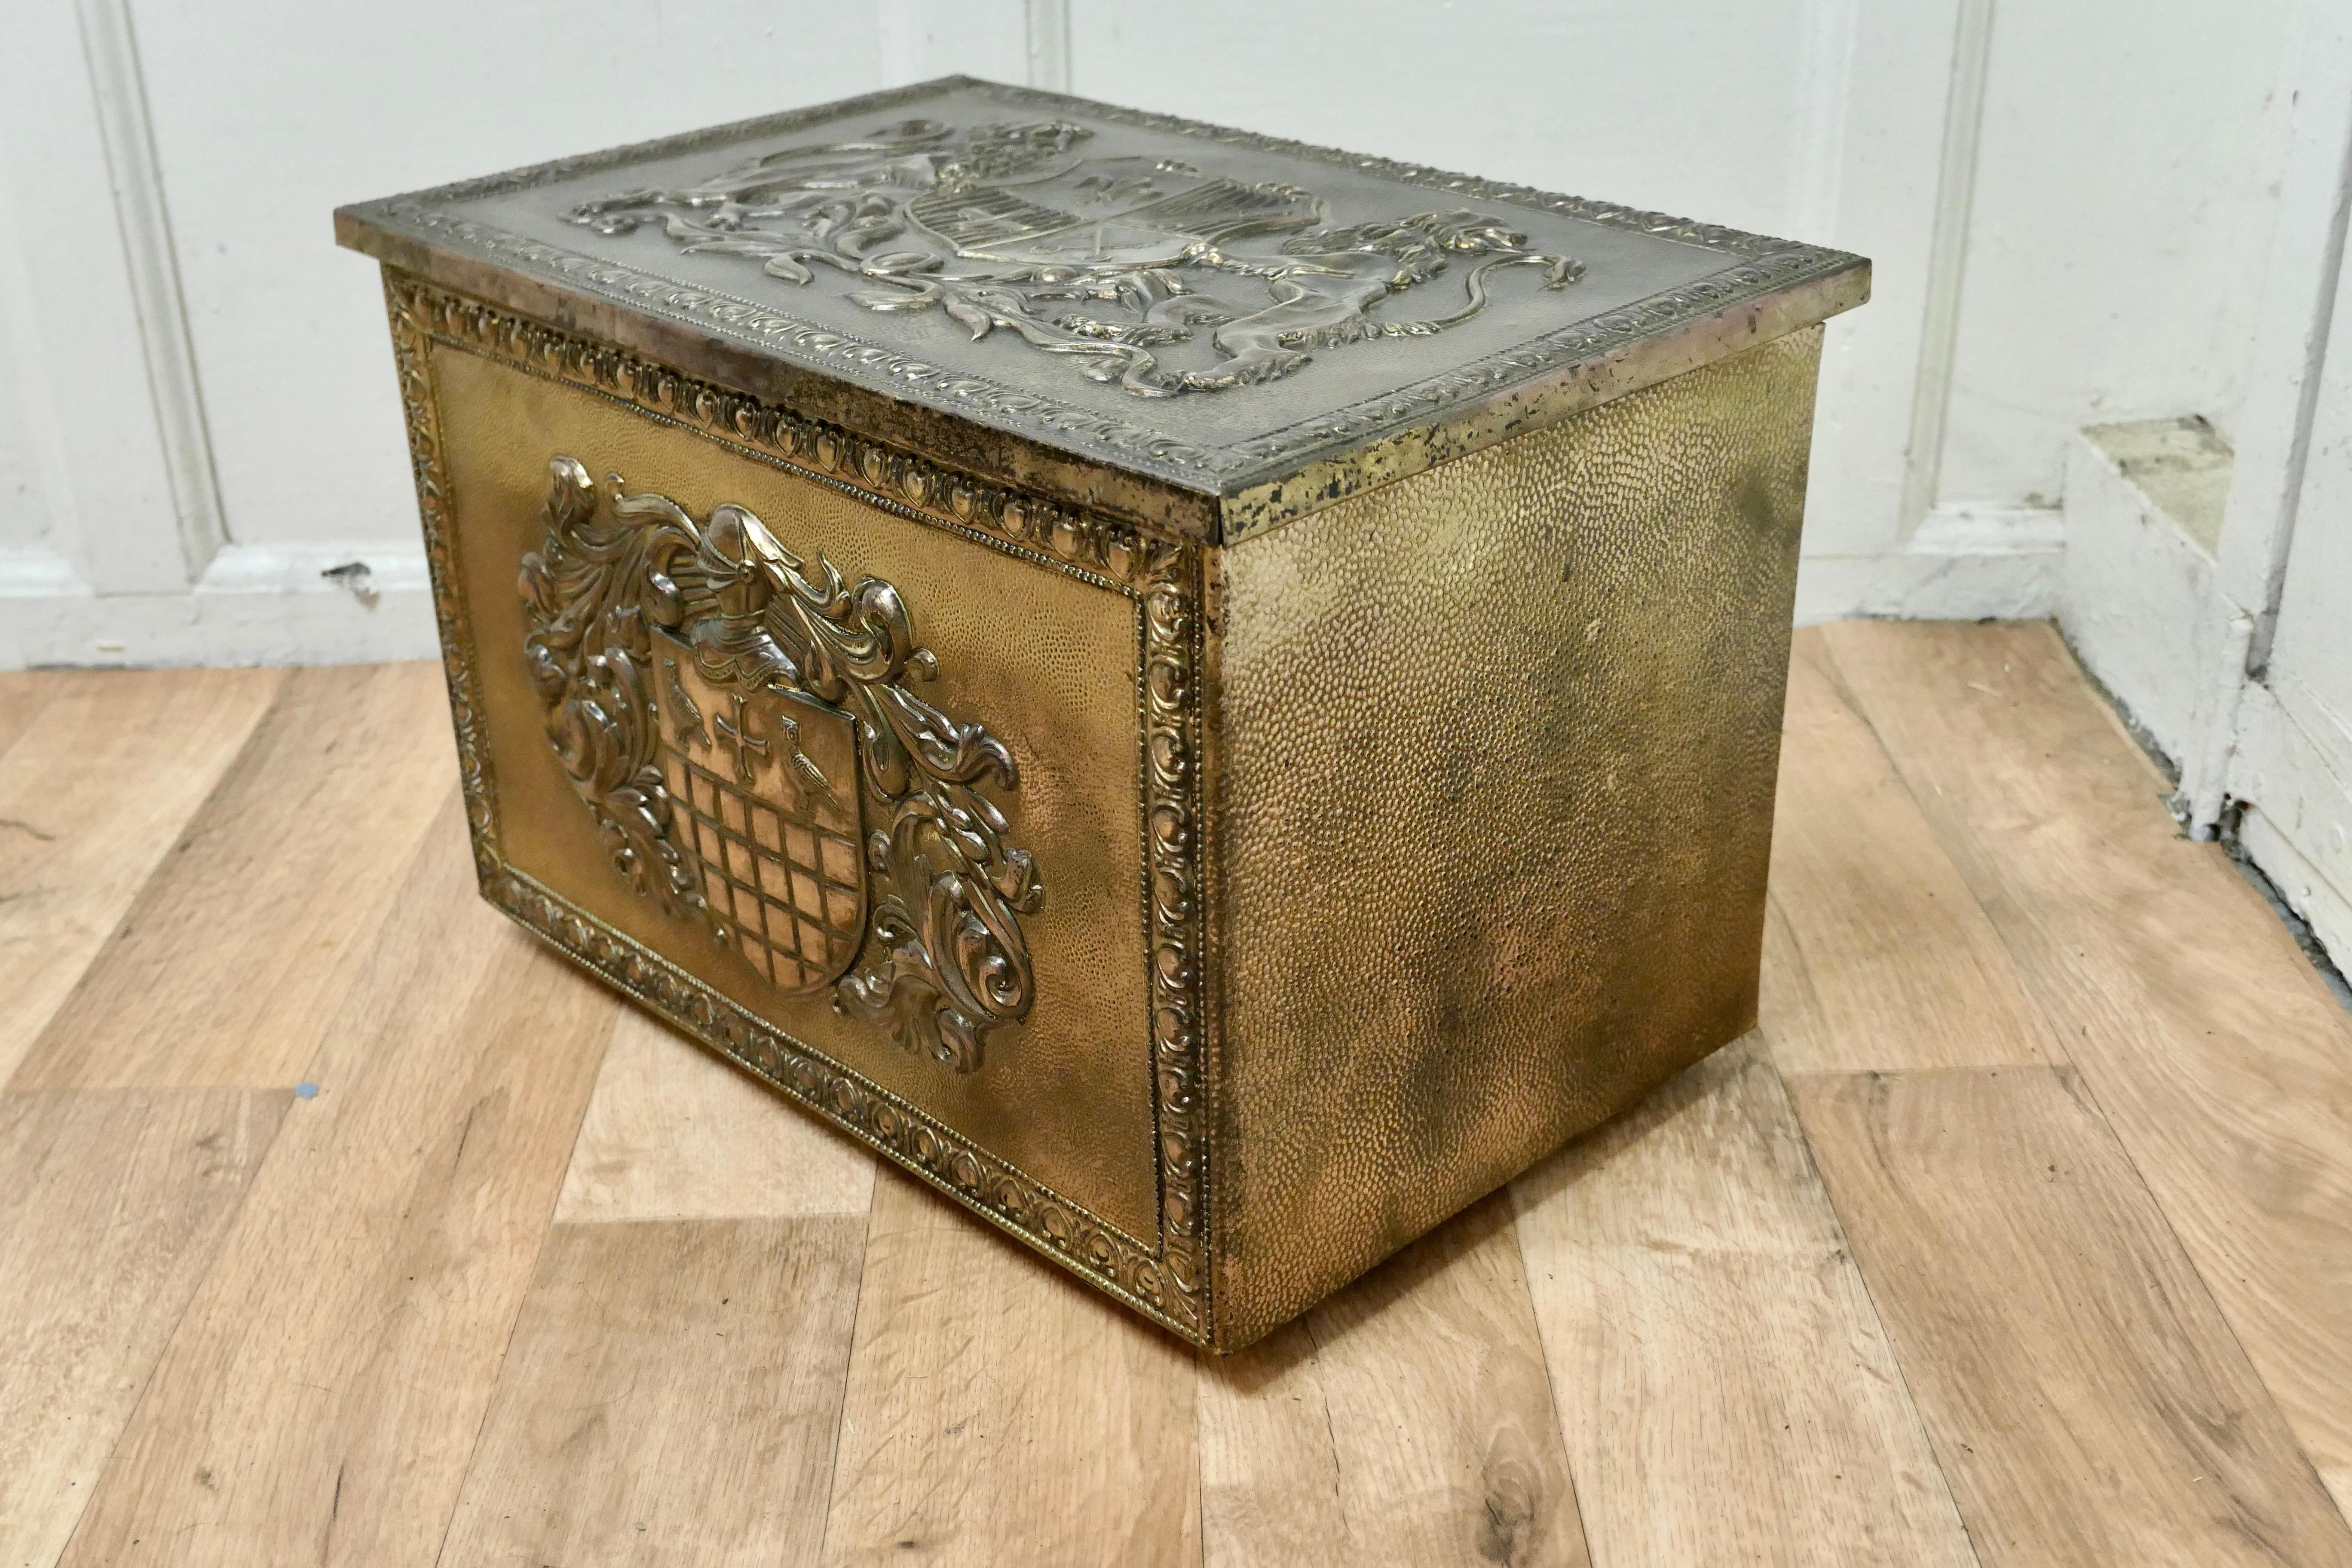 20th Century Heraldic Embossed Brass Log Box, with Coats of Arms